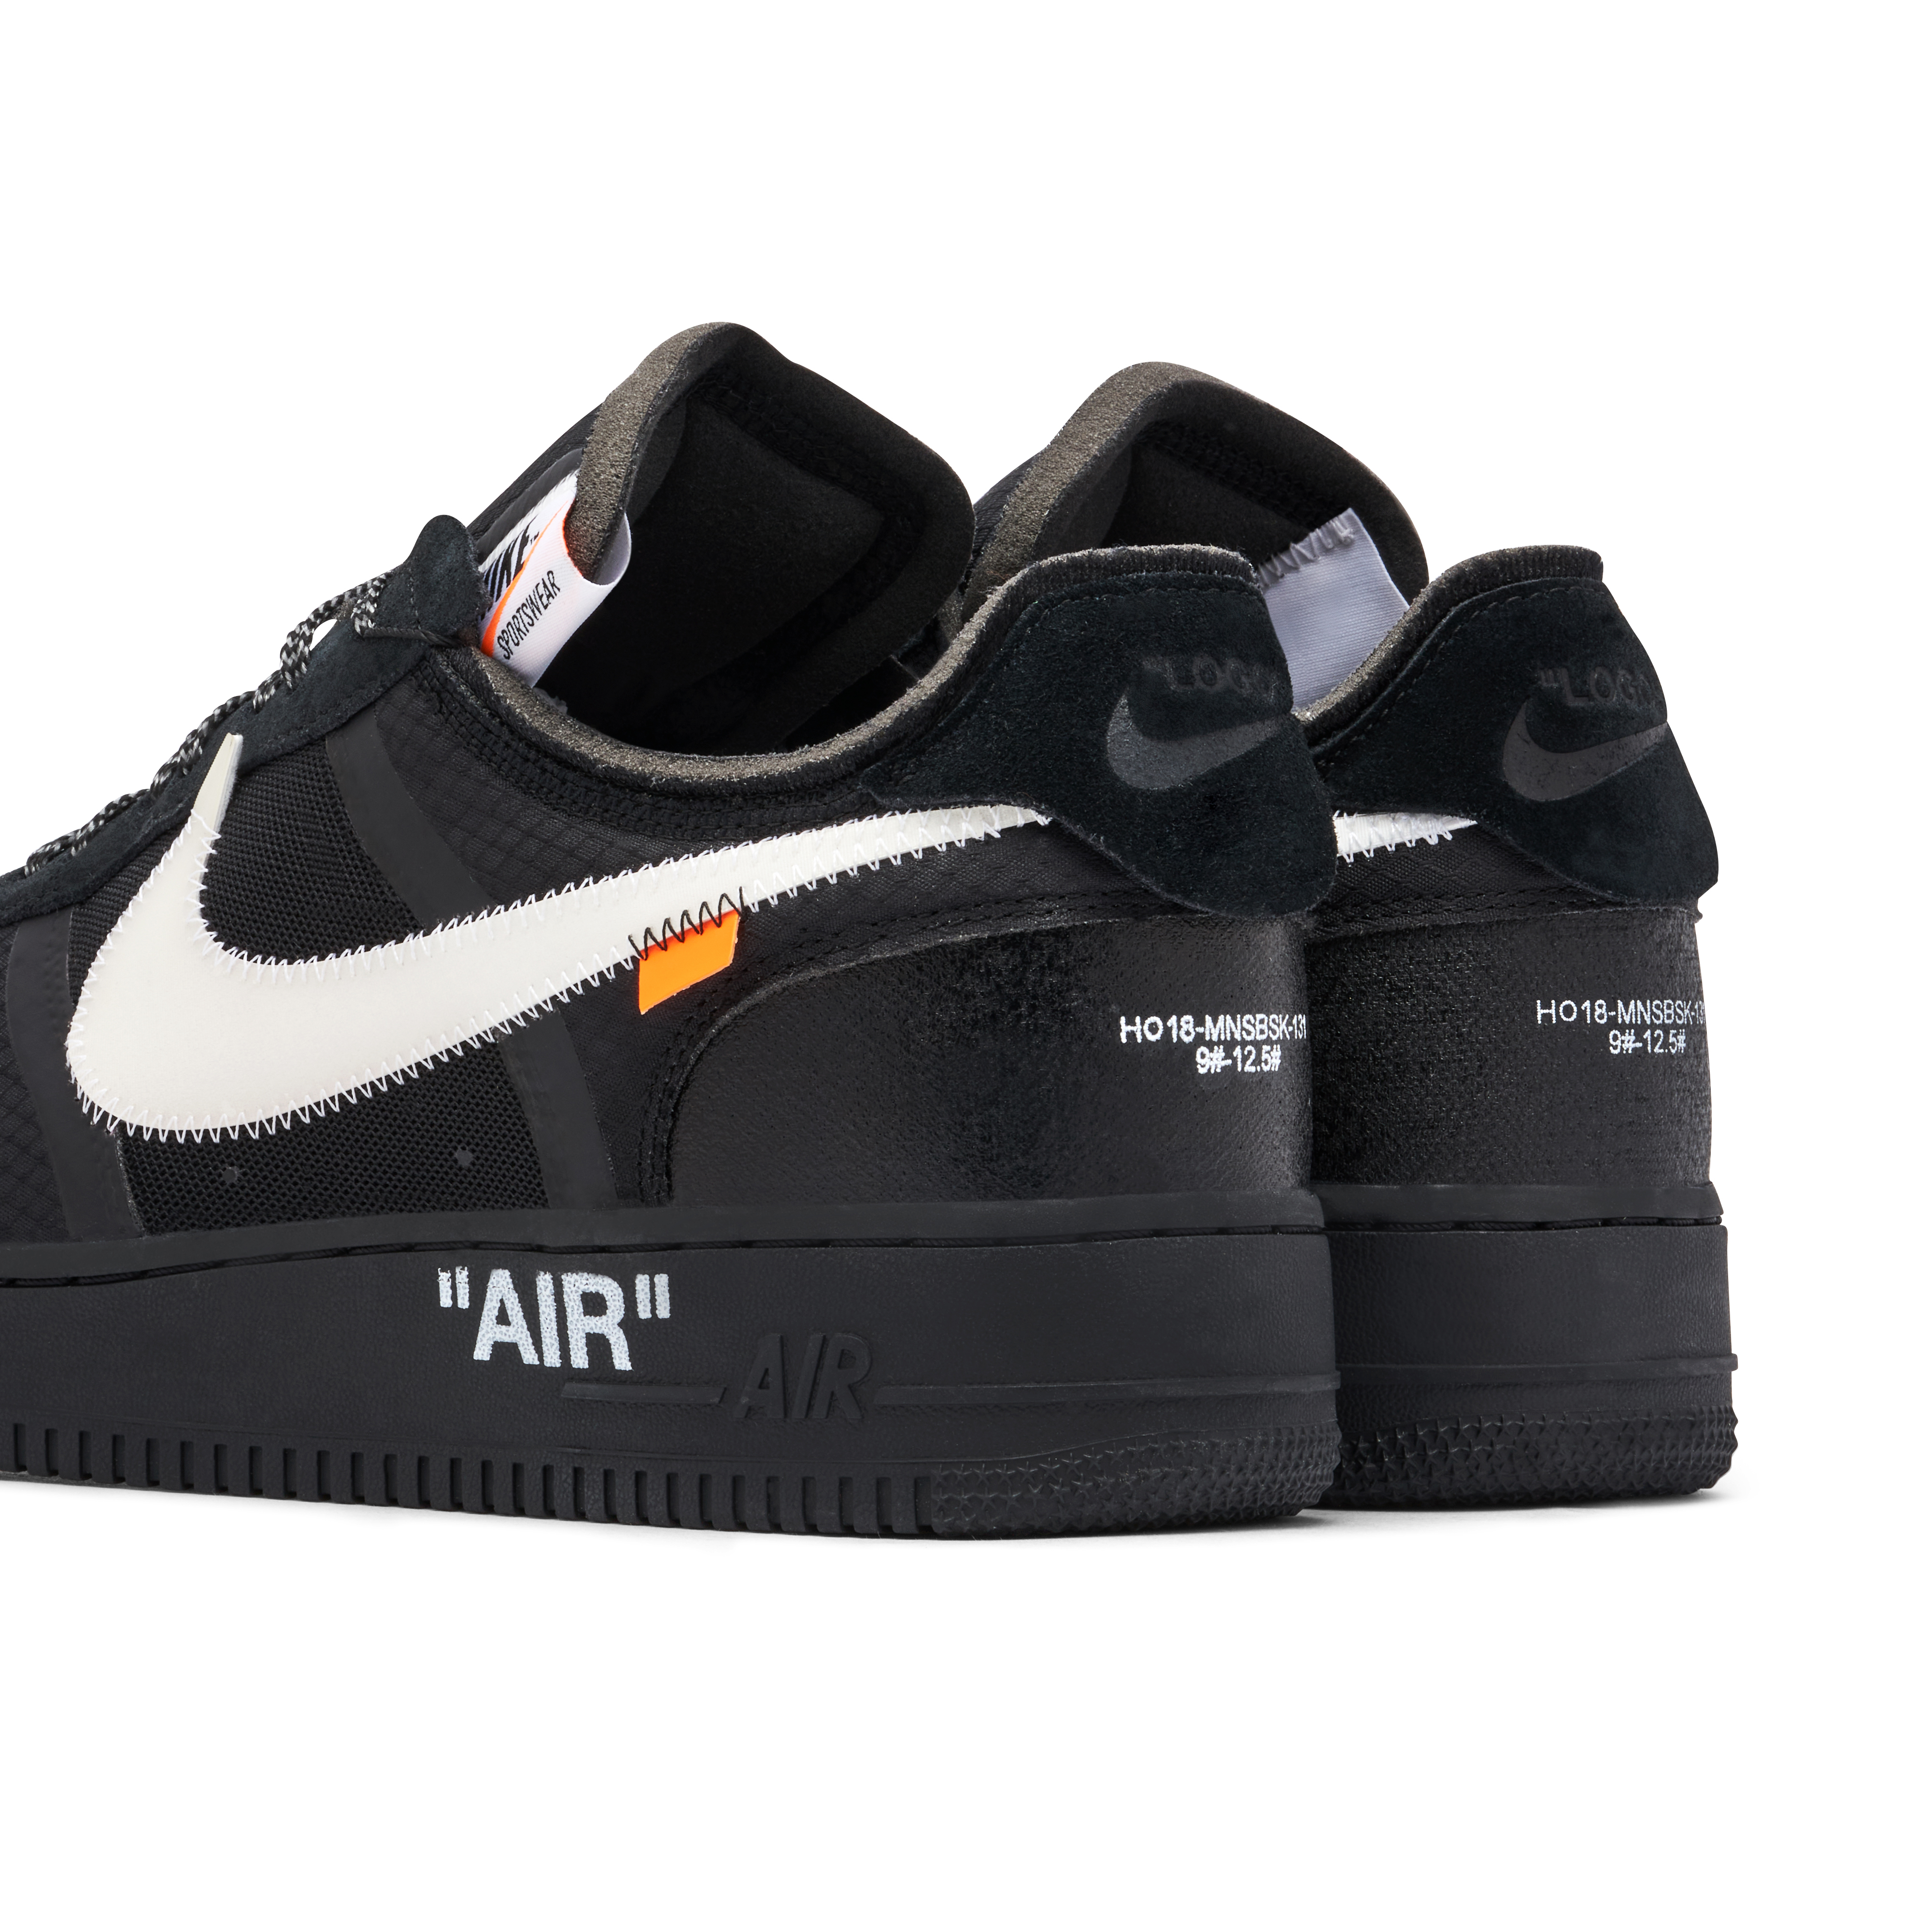 Get Ready For The OFF-WHITE x Nike Air Force 1 Low Black •